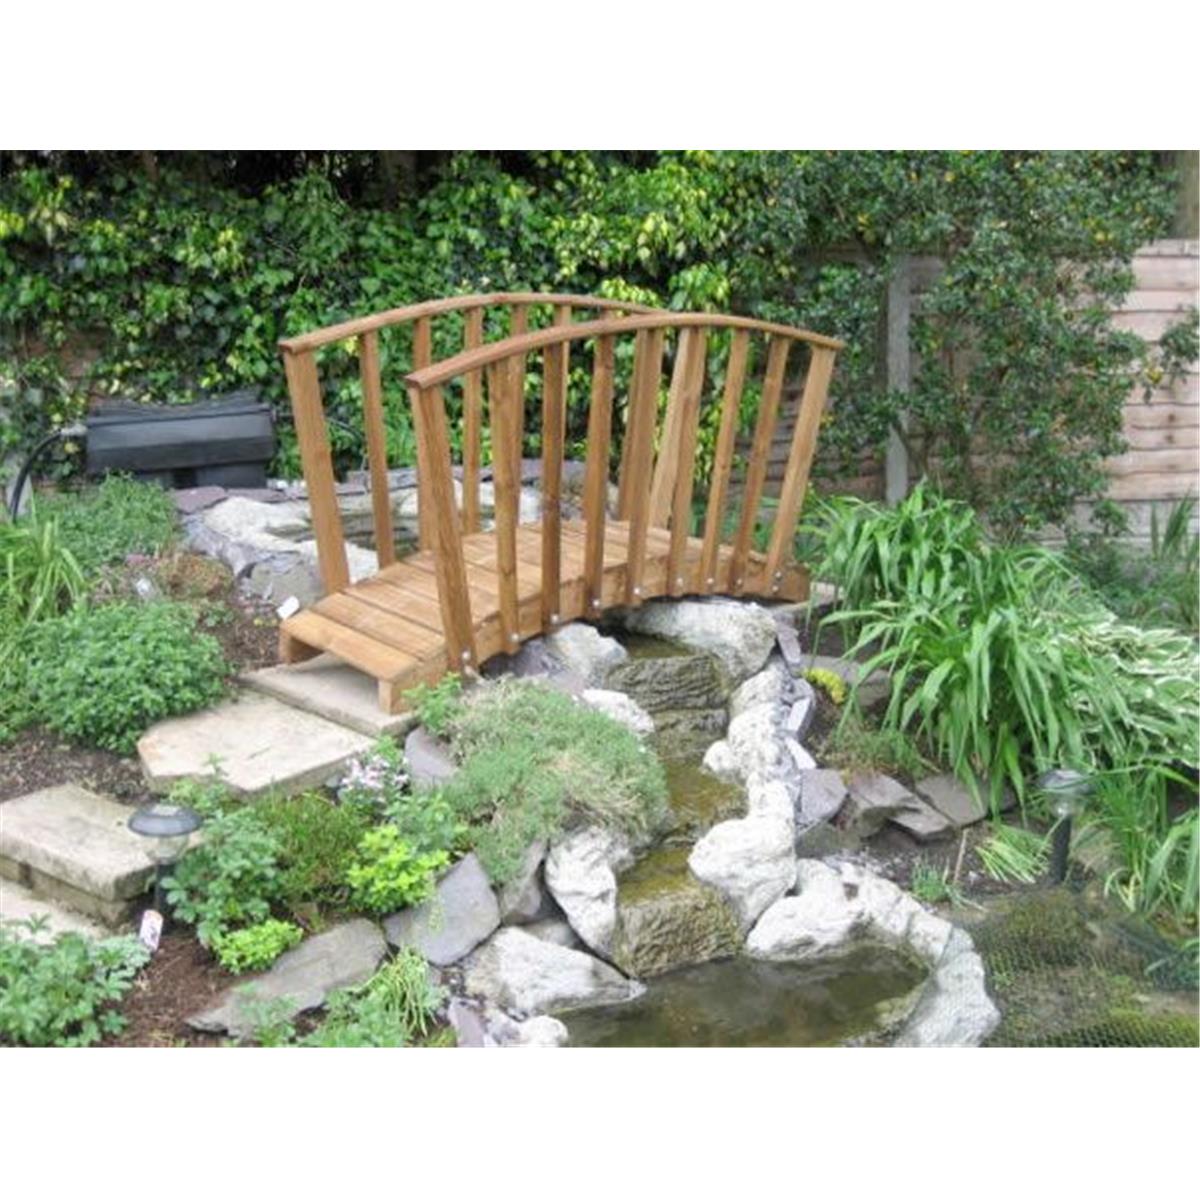 8 Ft. Monets Red Cedar Bridge With Curved Wisteria Canopy